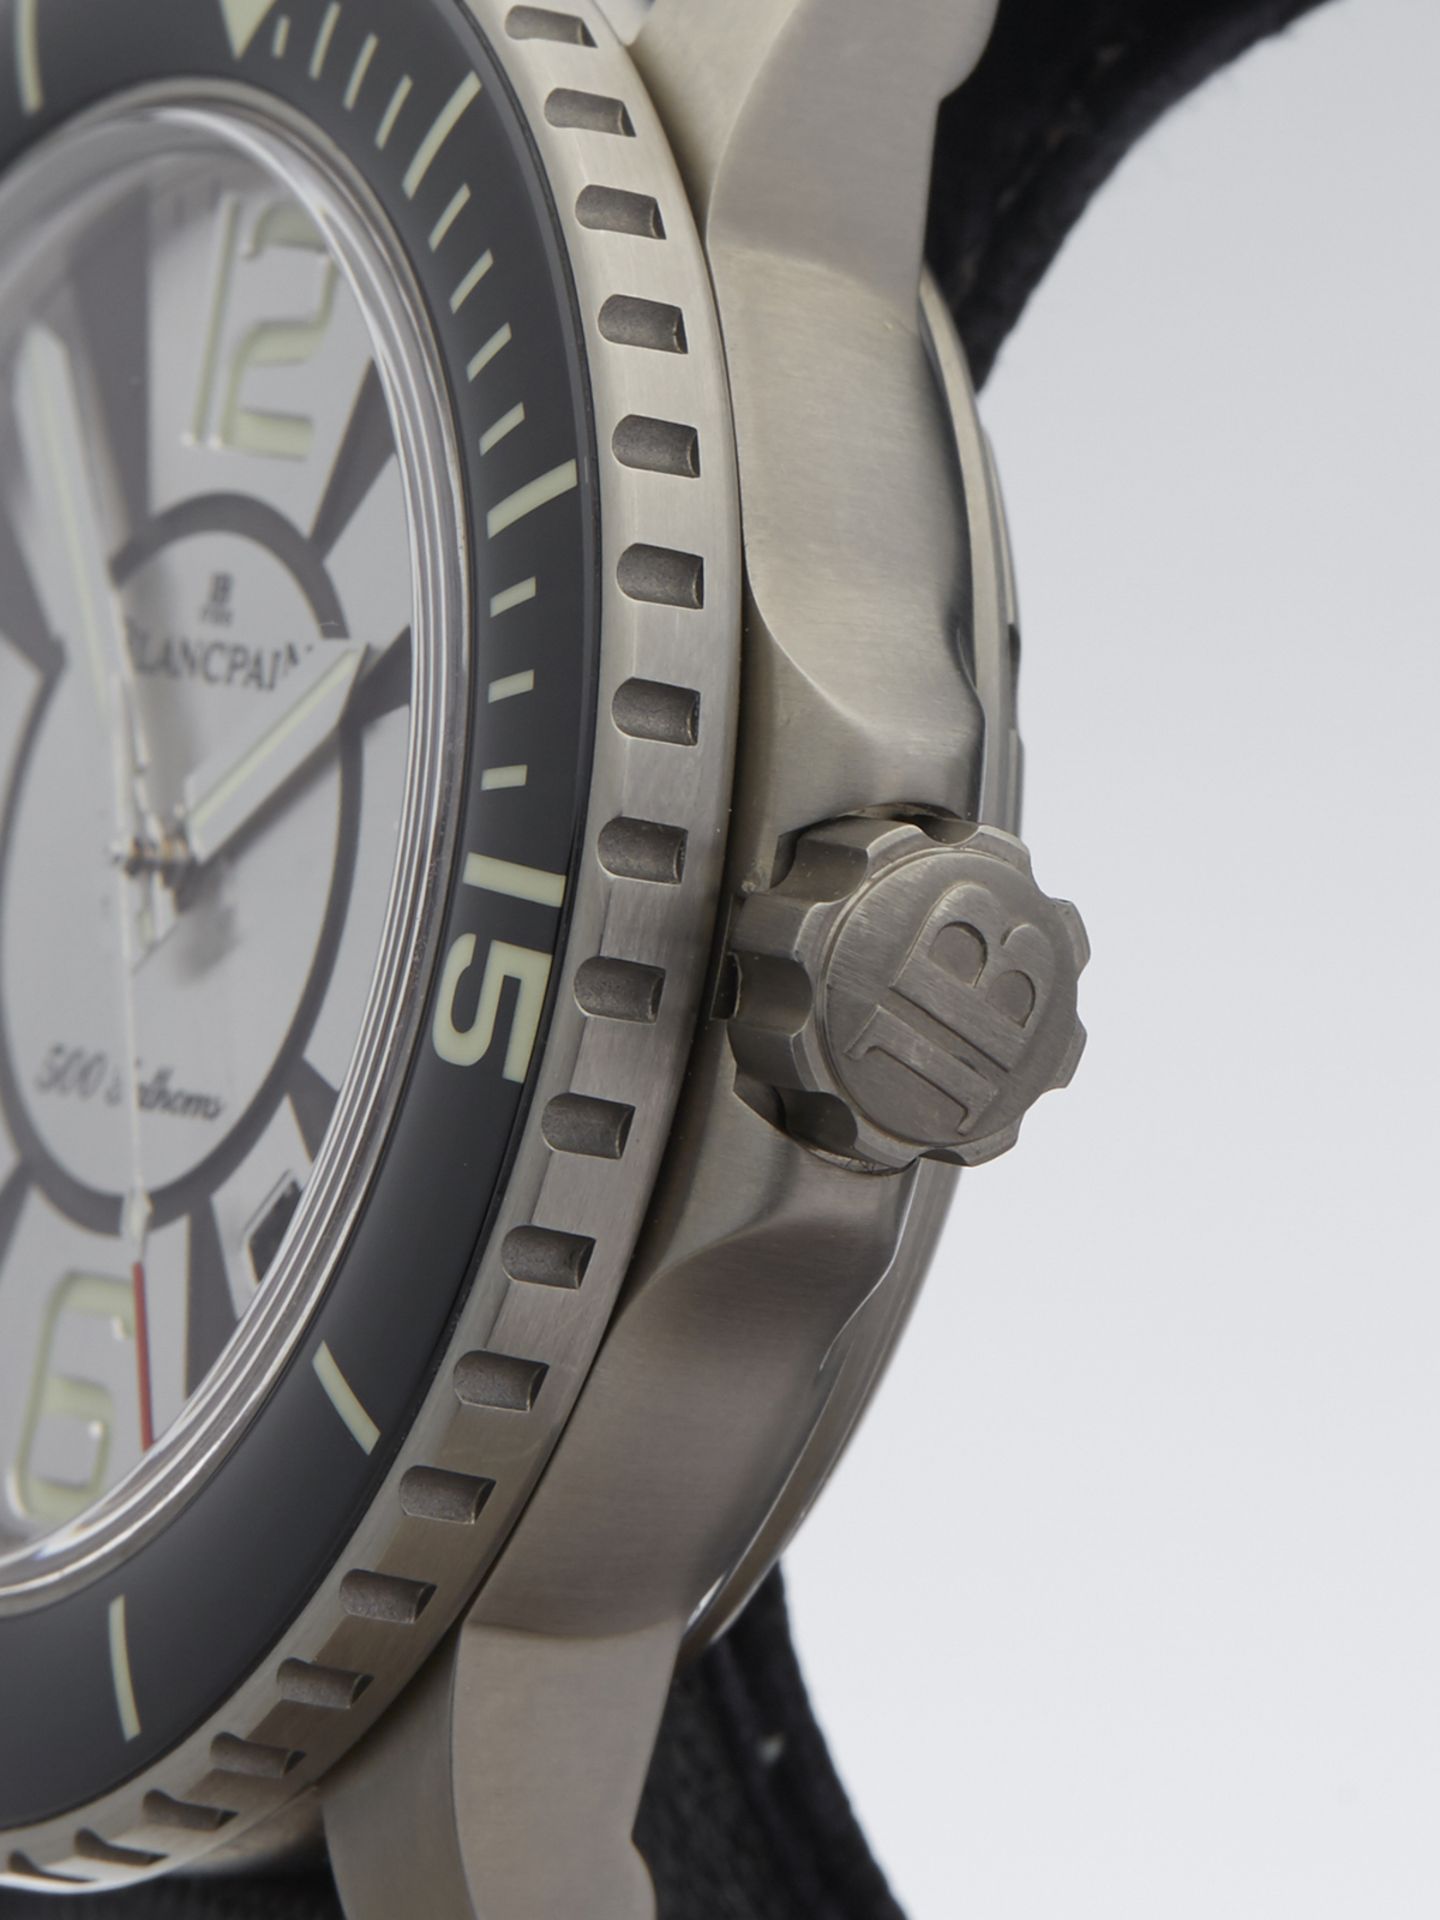 Blancpain Fifty Fathoms - Image 4 of 8